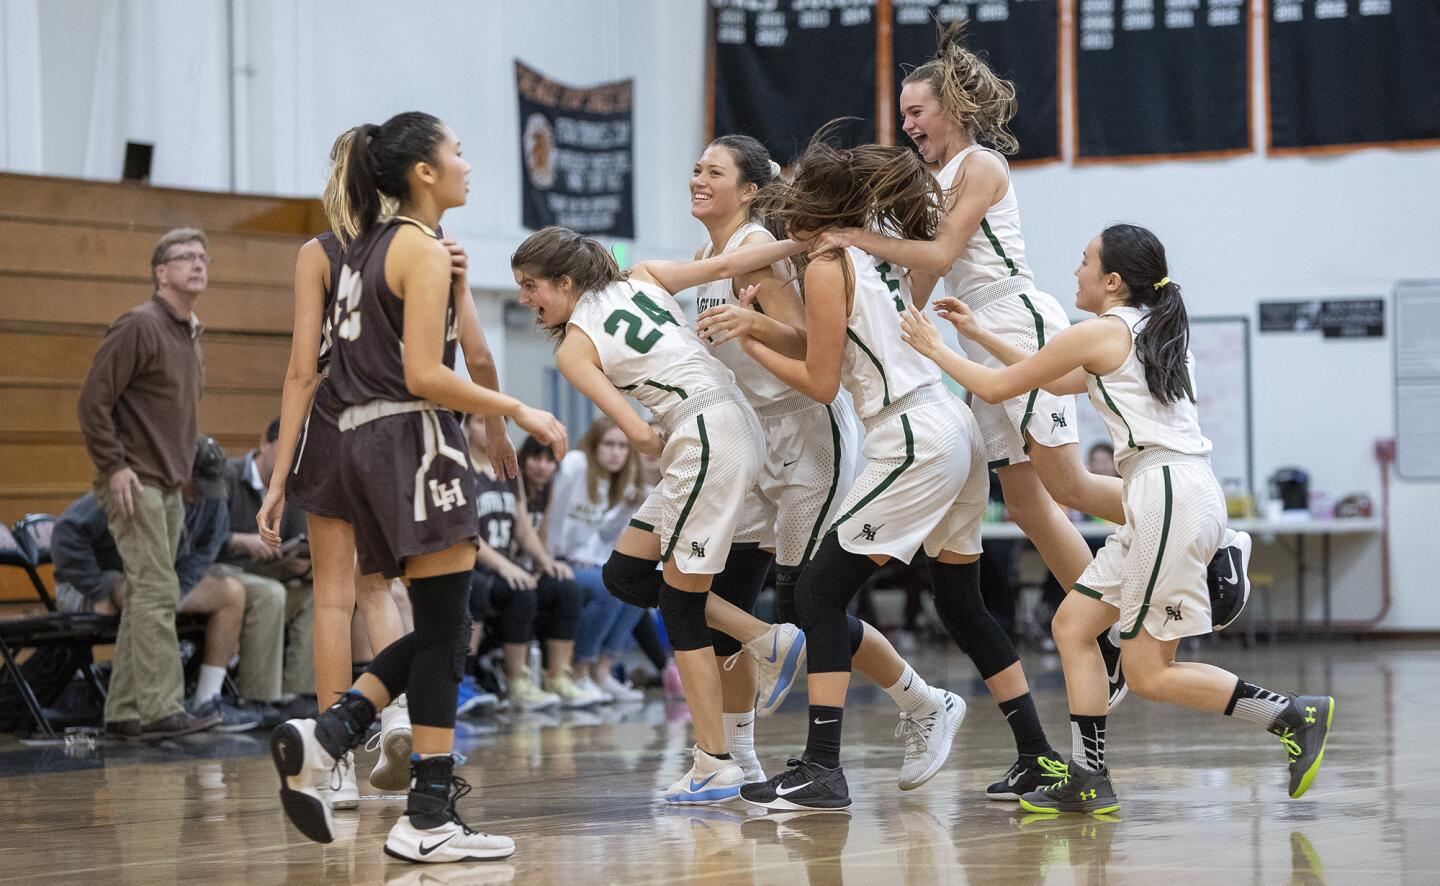 Sage Hill teammates mob Emily Elliott, center, after she hit a game winning shot with one second in a game against Laguna Hills in an Ultimate Flight game at the Hawk Holiday Classic at Los Amigos High School on Friday, December 7.